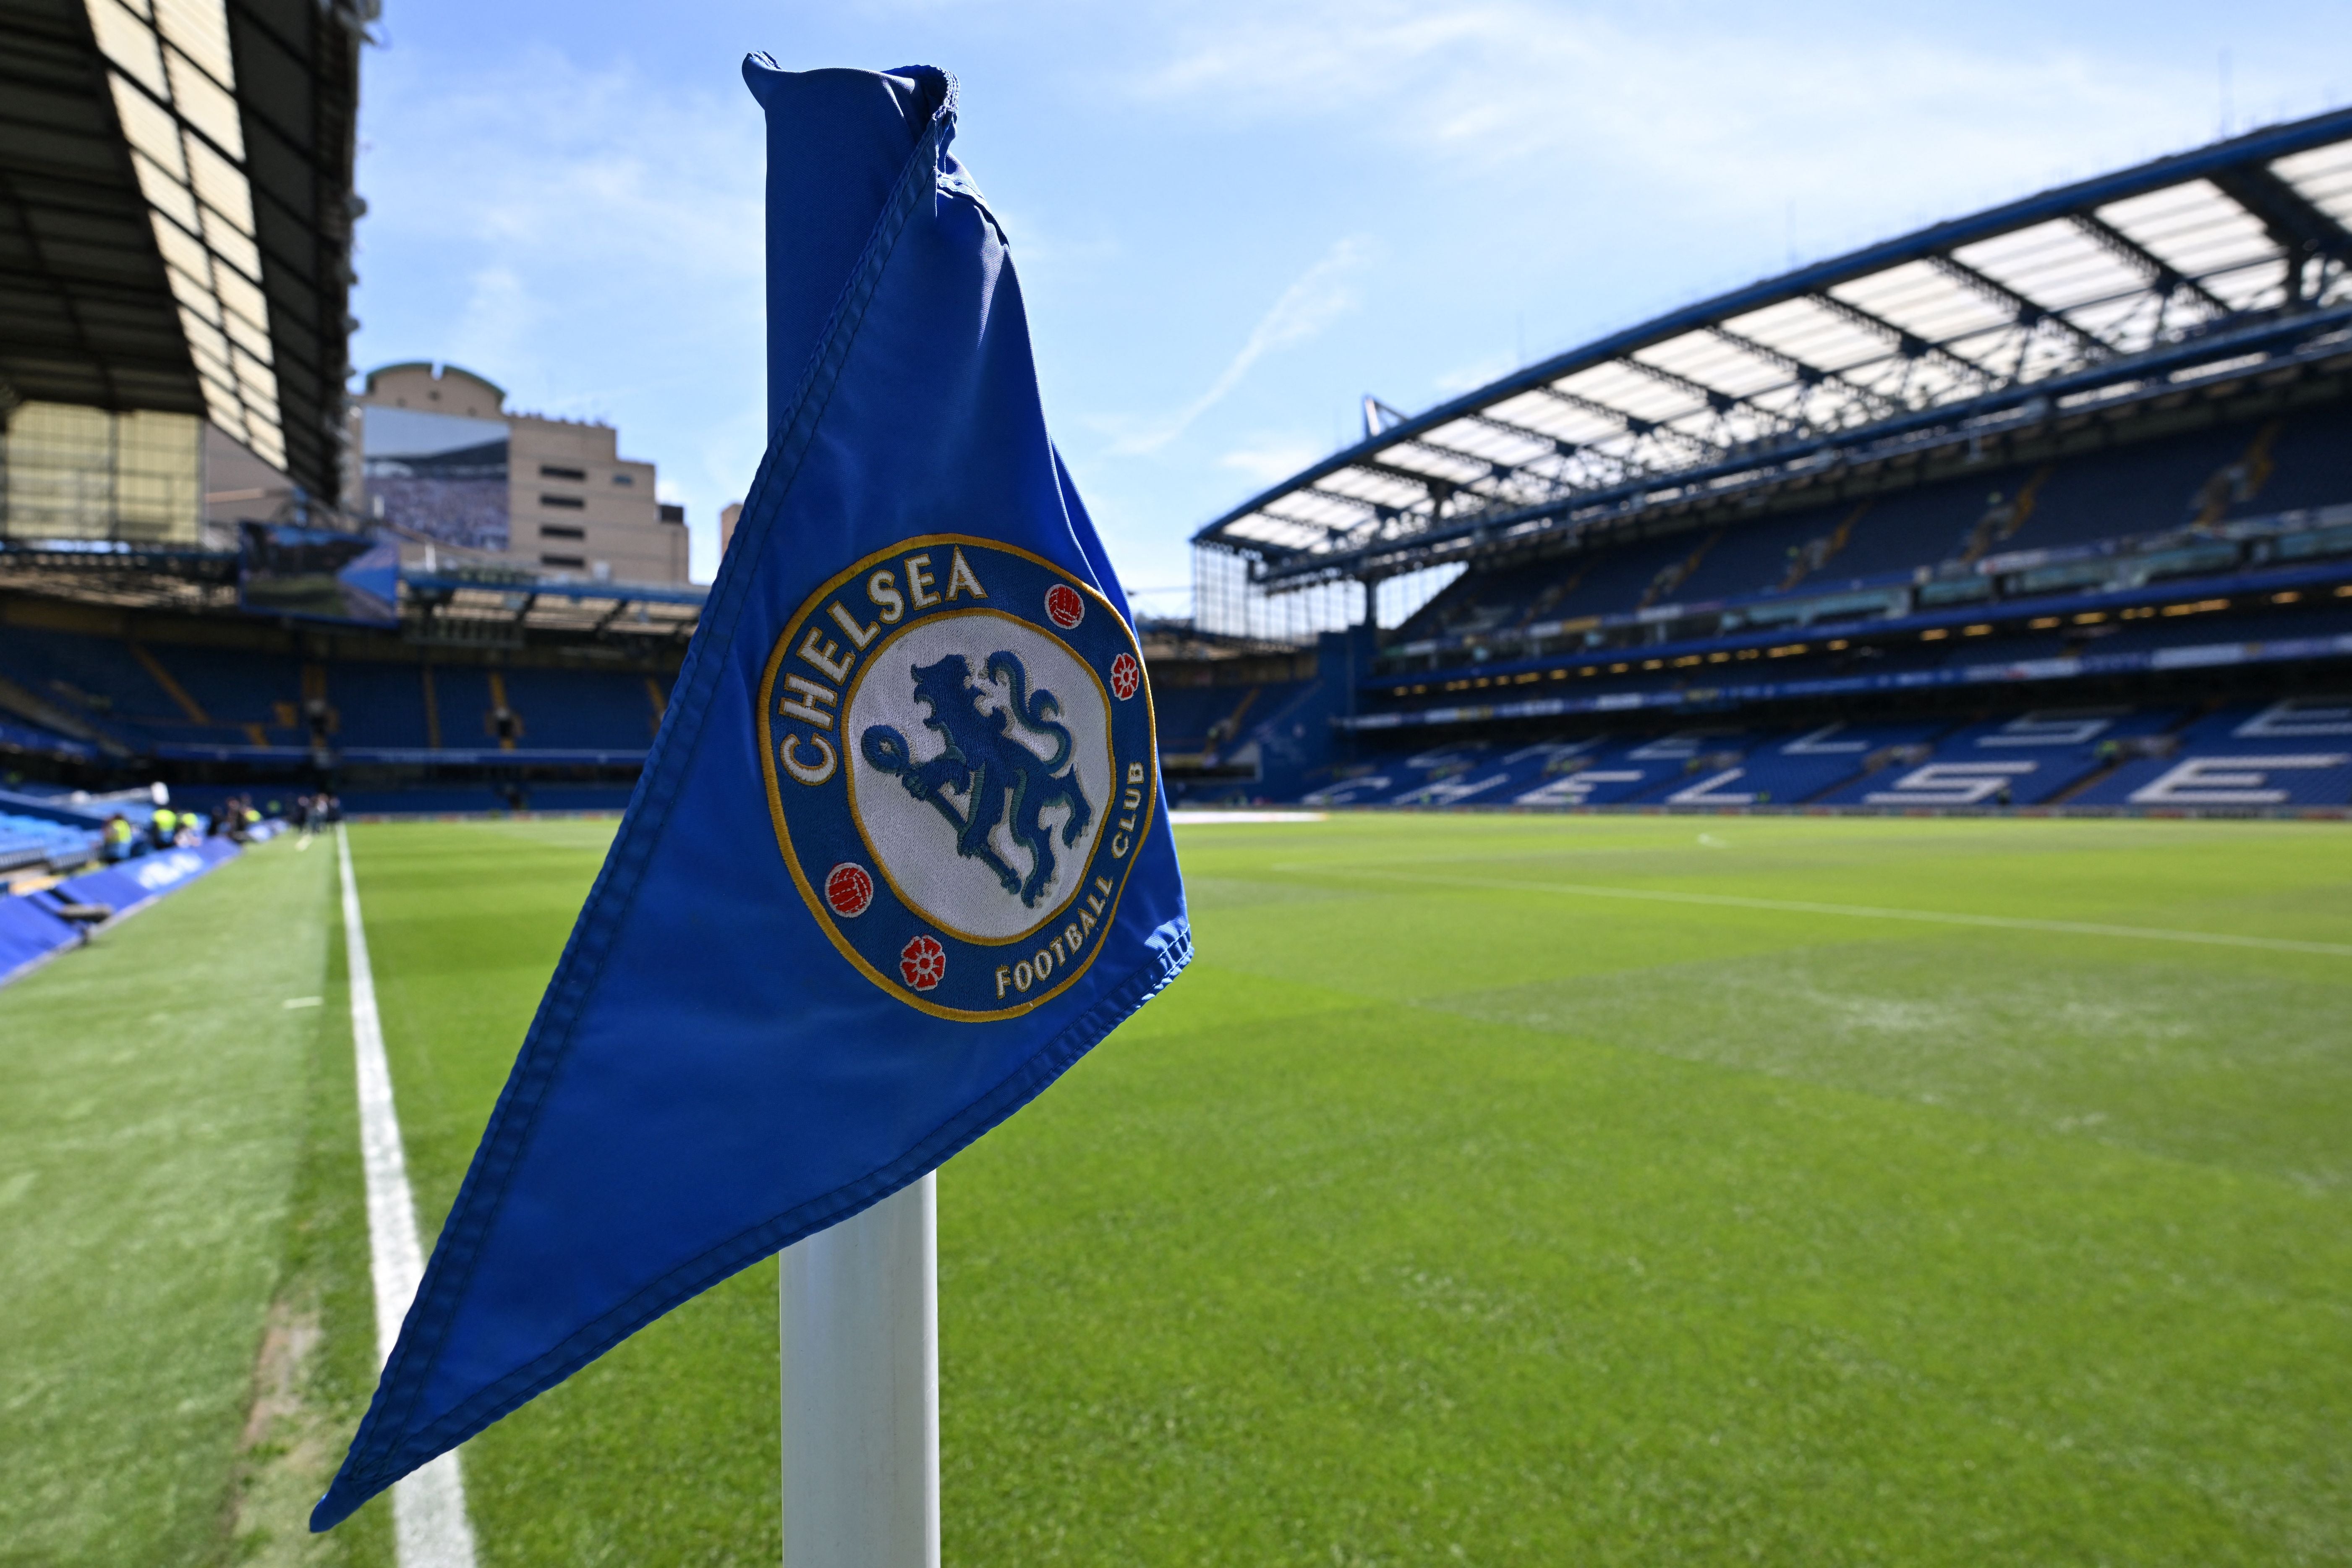 Billionaire Todd Boehly partnered US private equity firm Clearlake Capital to buy Chelsea for £4.25bn in May